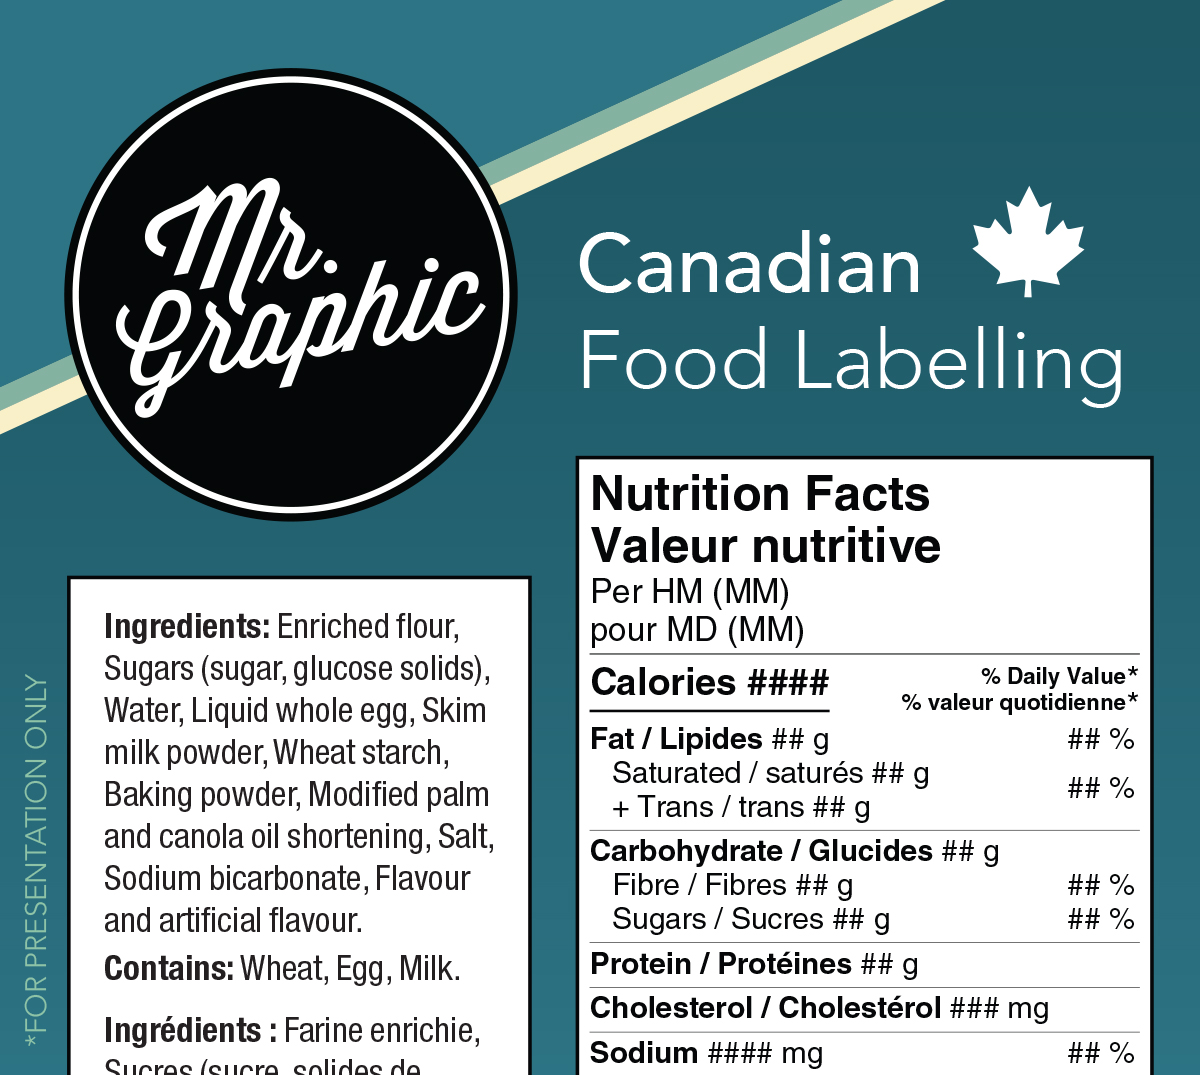 Canadian Food Labelling – Update